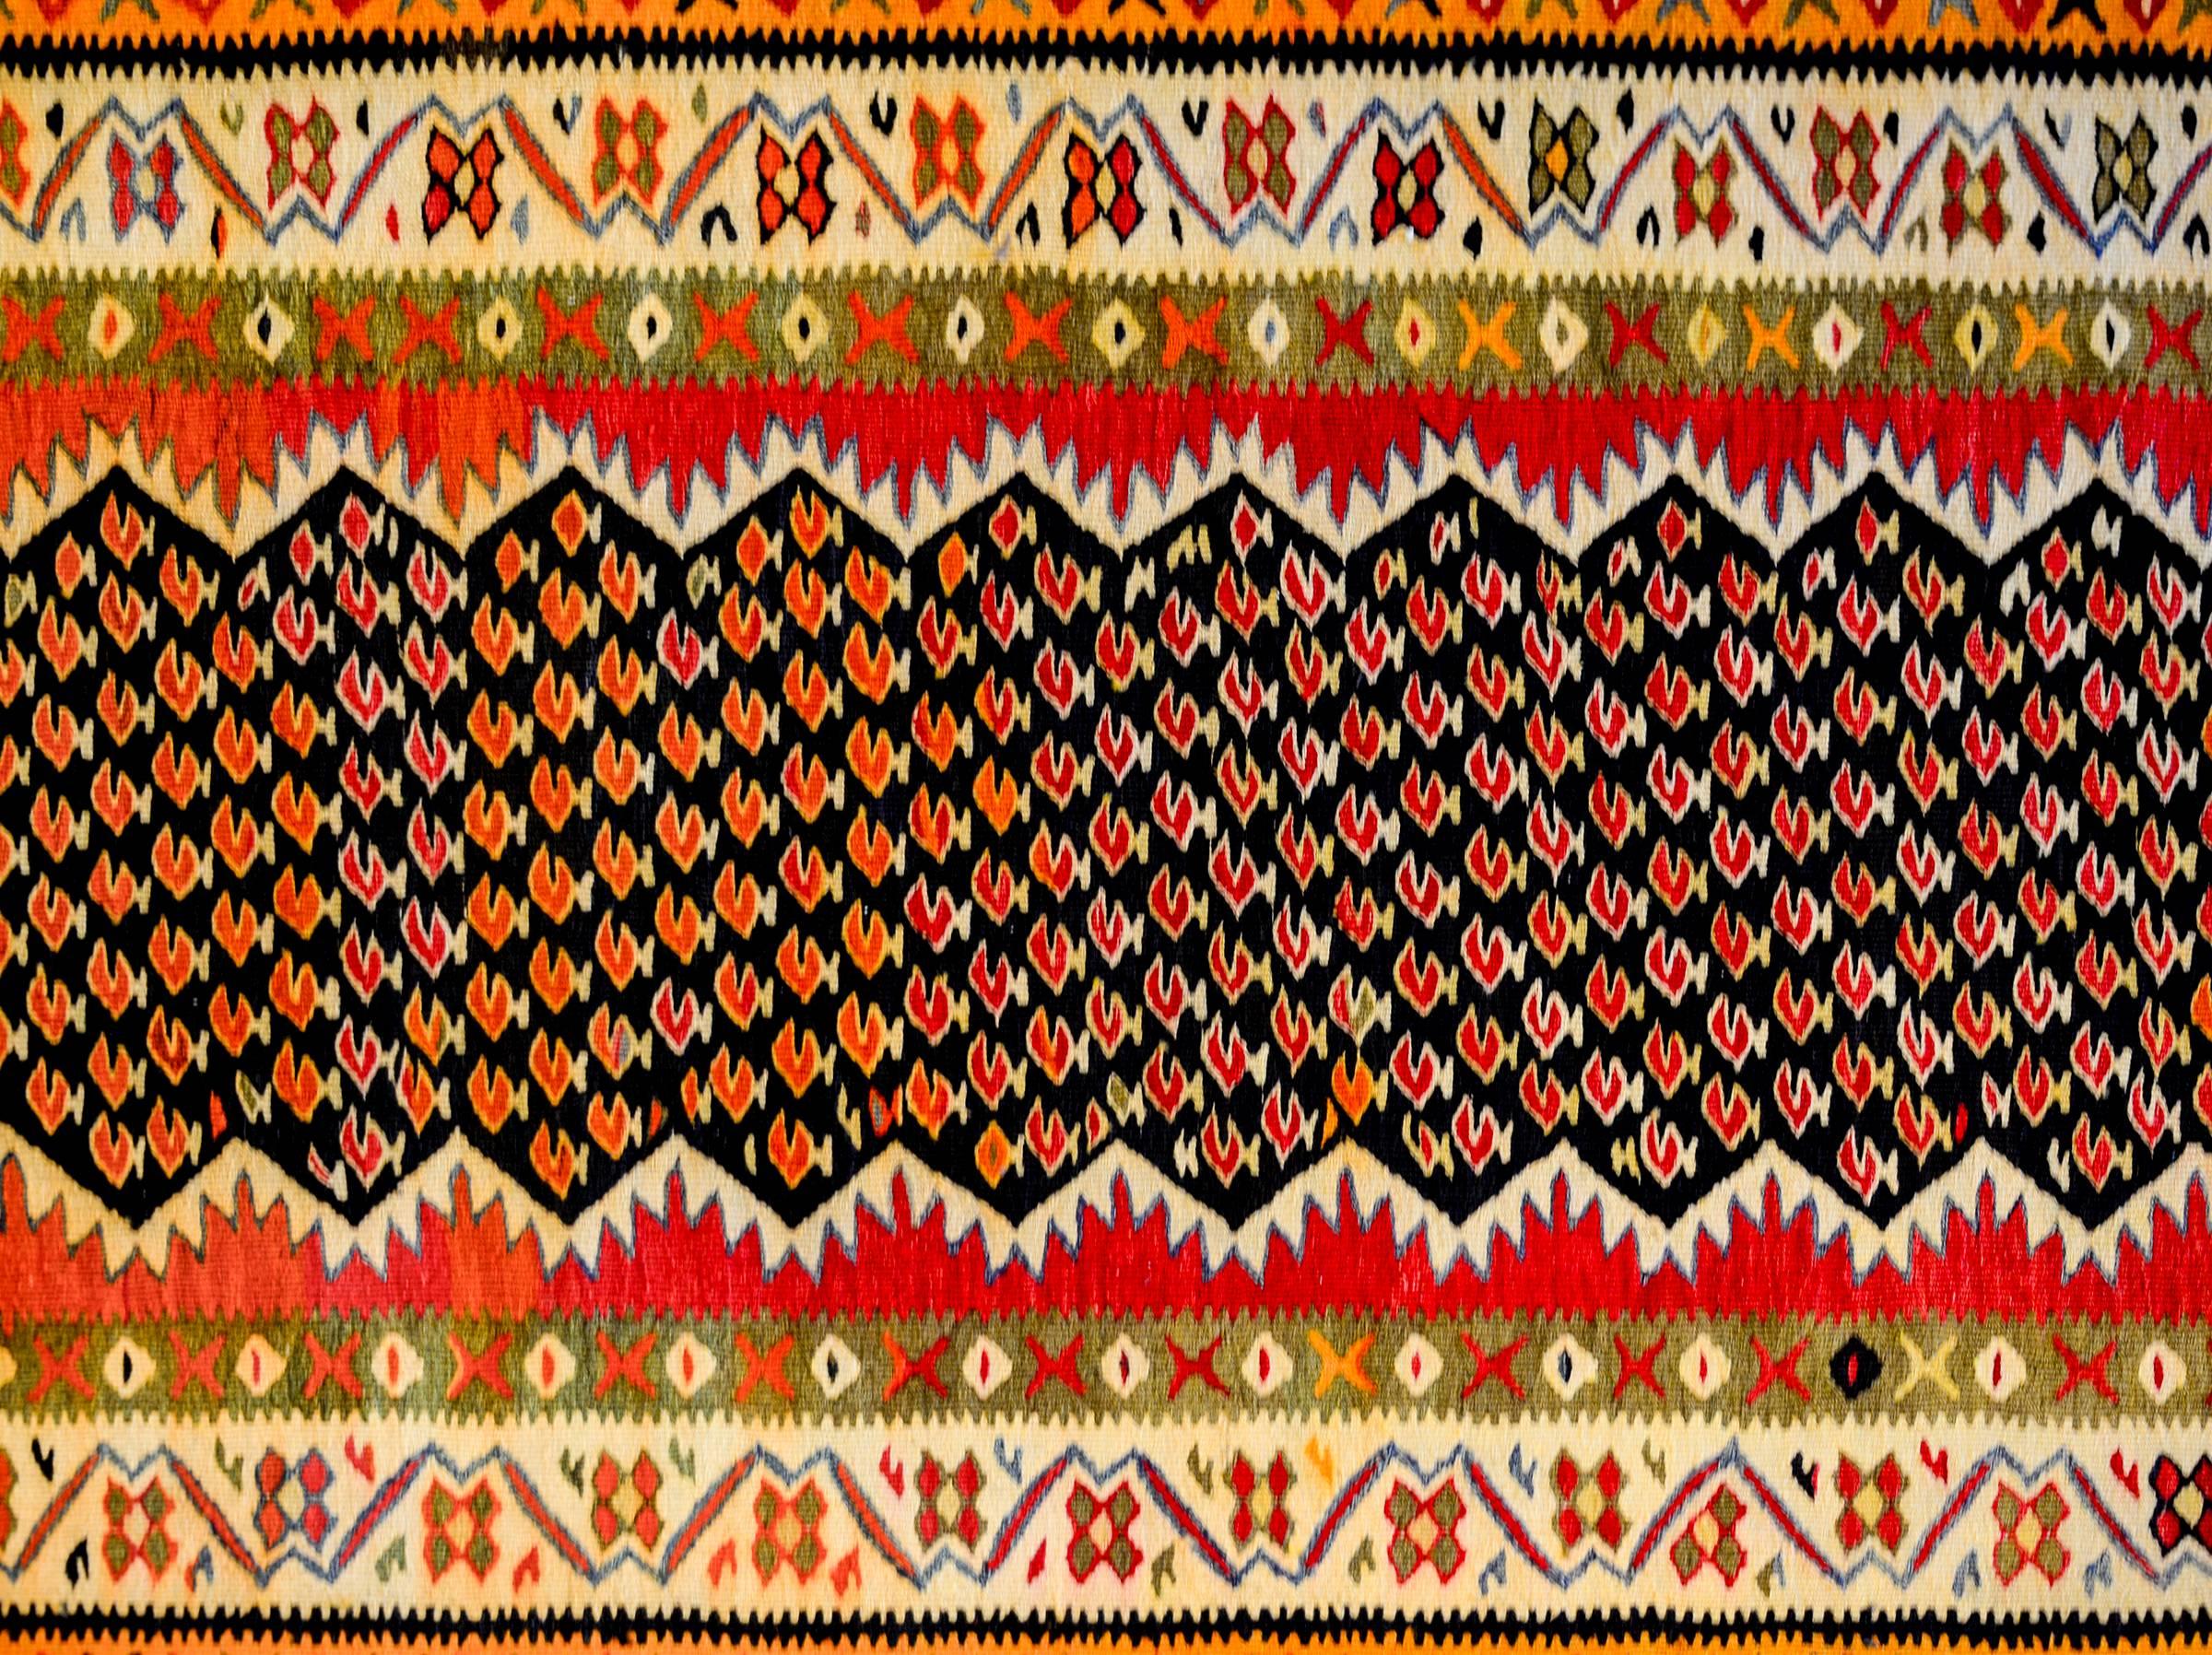 A wonderful mid-20th century Persian Kurdish Kilim runner with an all-over crimson paisley pattern on a black background surrounded by a complex border of five distinct floral and geometric patterns, woven in crimson, green, gold, white, and black